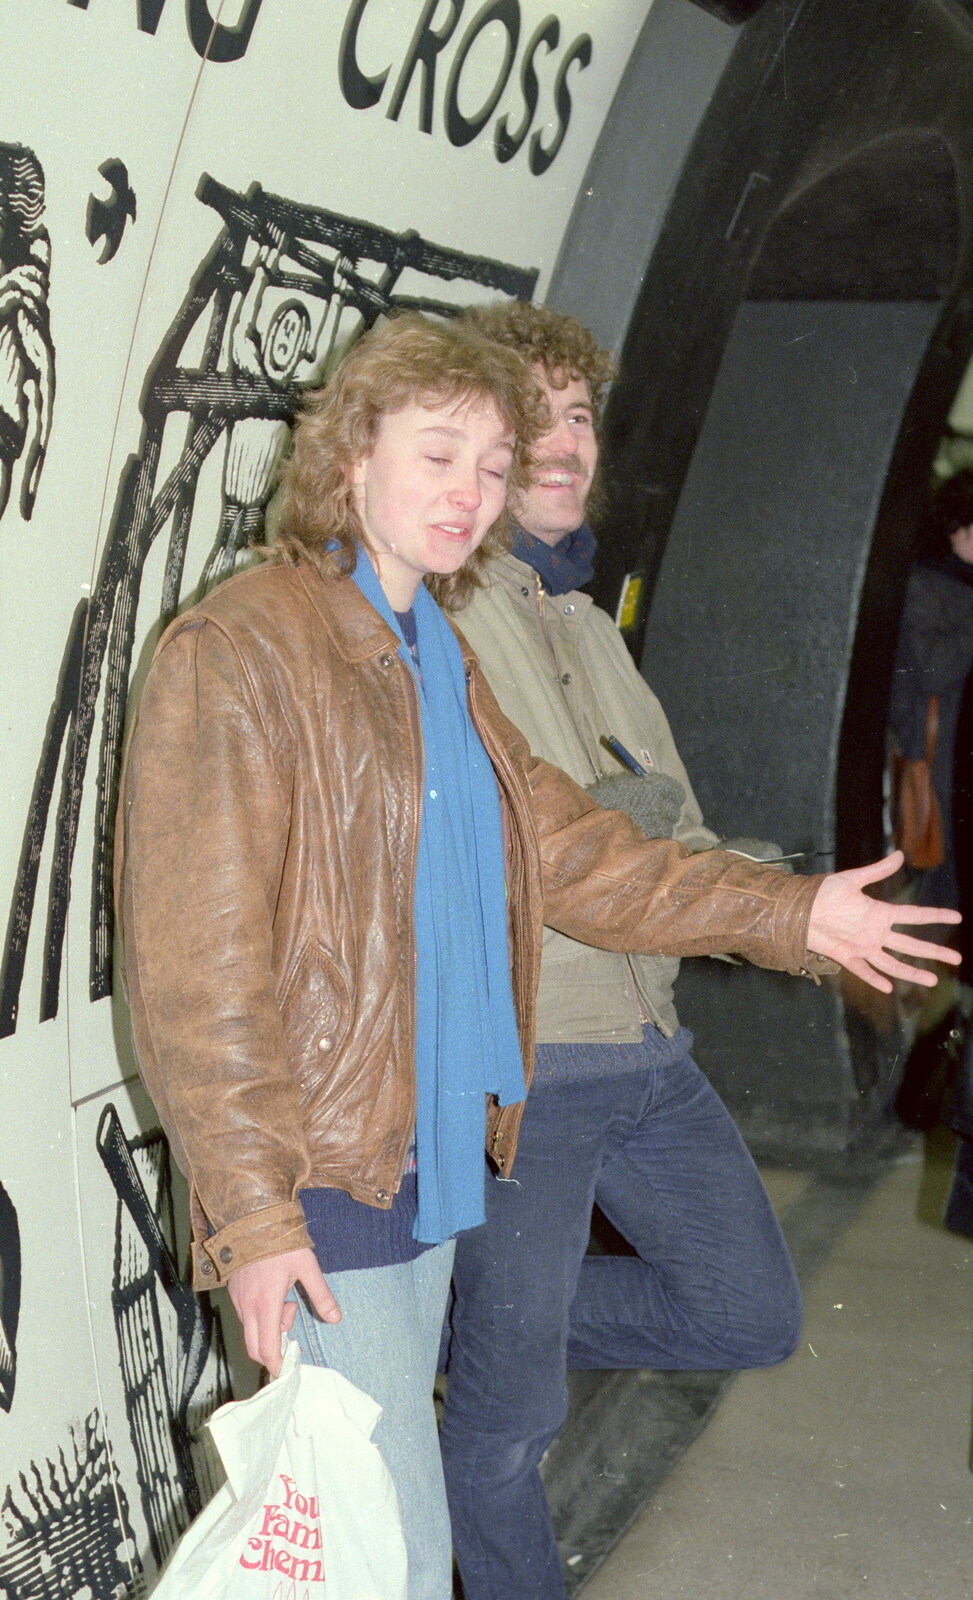 Alison and Sam at Charing Cross tube station from Uni: No Chance Fowler! A student Demonstration, London - 26th February 1986